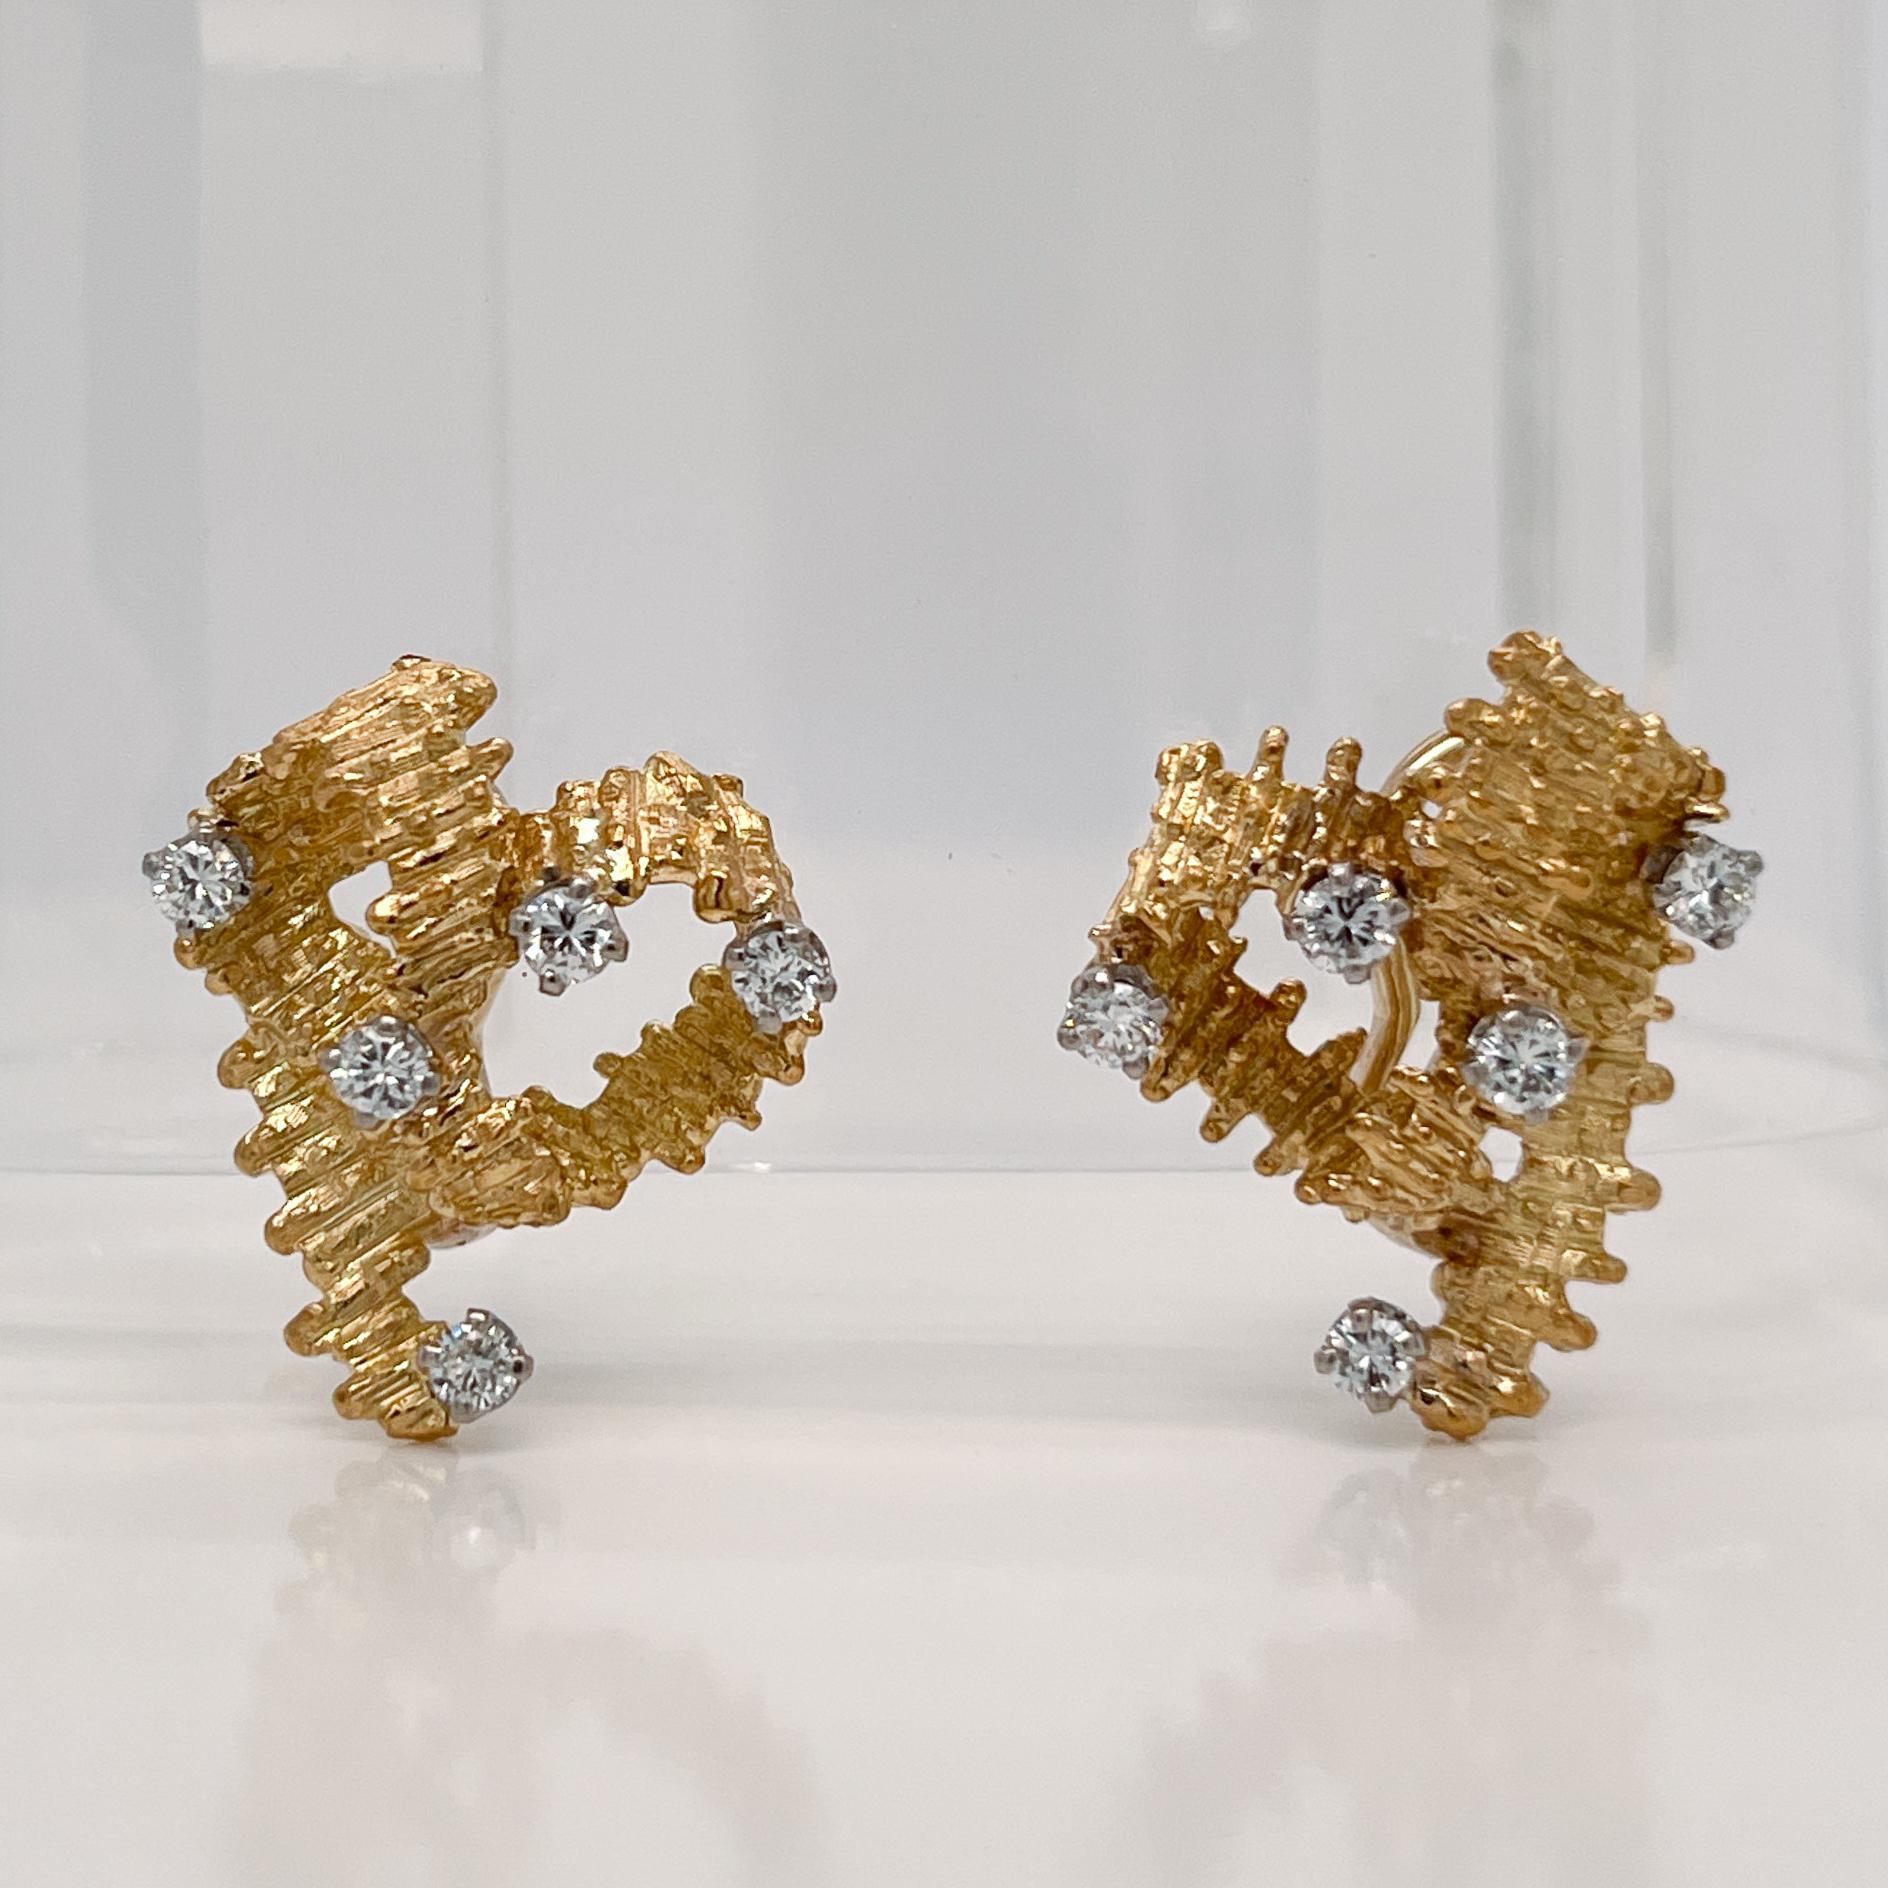 A wonderful pair of gold and diamond brutalist earrings.

With 10 round brilliant diamonds prong set in 18k gold and scattered throughout a Brutalist ribbon form.

Simply an eye-catching pair of clip-on earrings!

Date:
20th Century

Overall